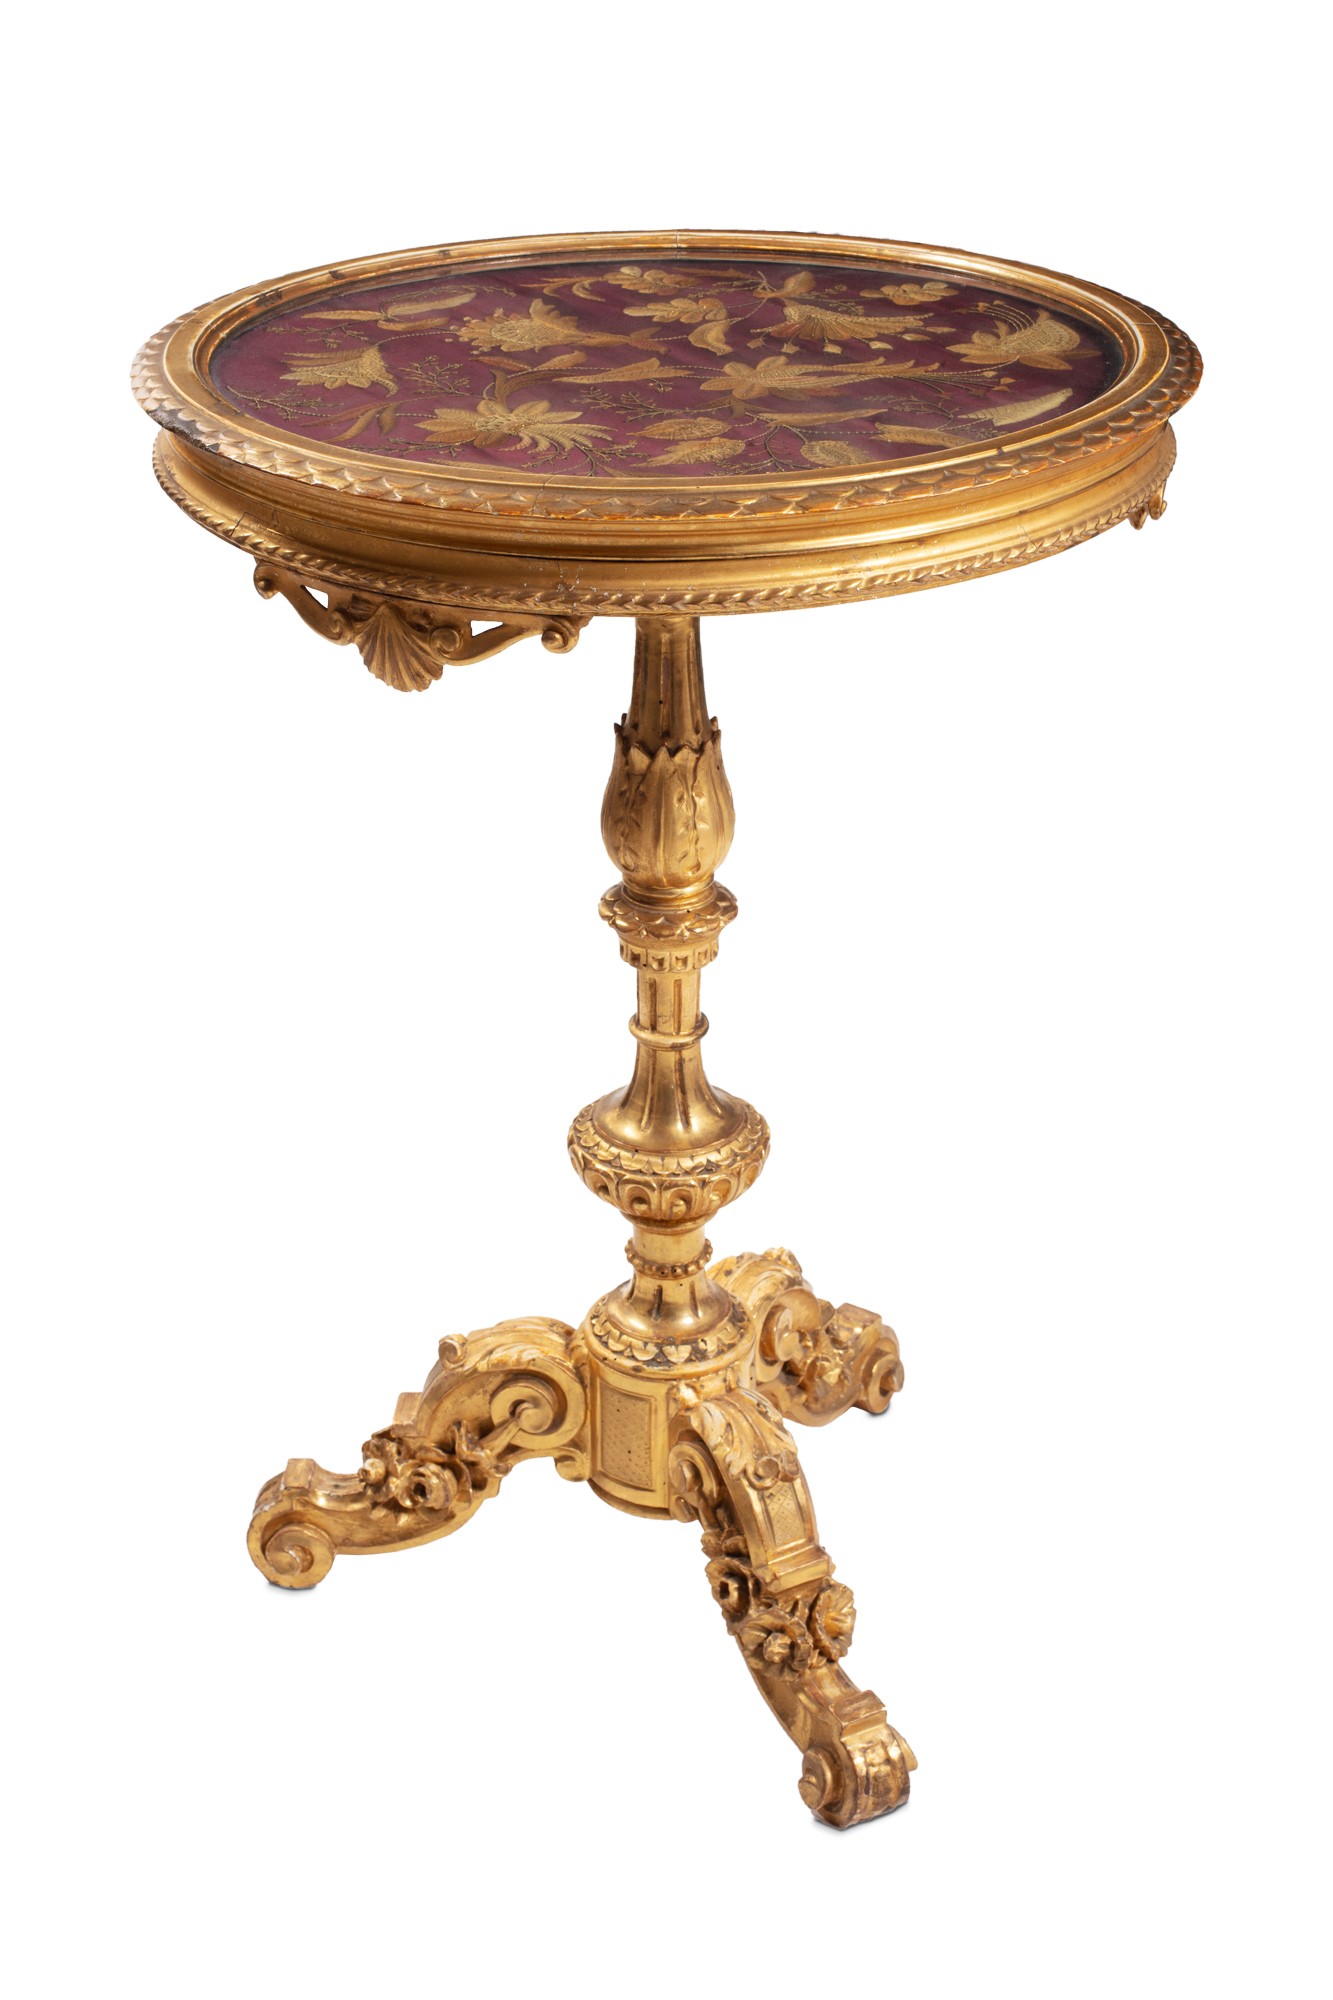 Carved and gilded wooden coffee table manifacture ligure, mid 19th century, with tripod base, - Image 2 of 8